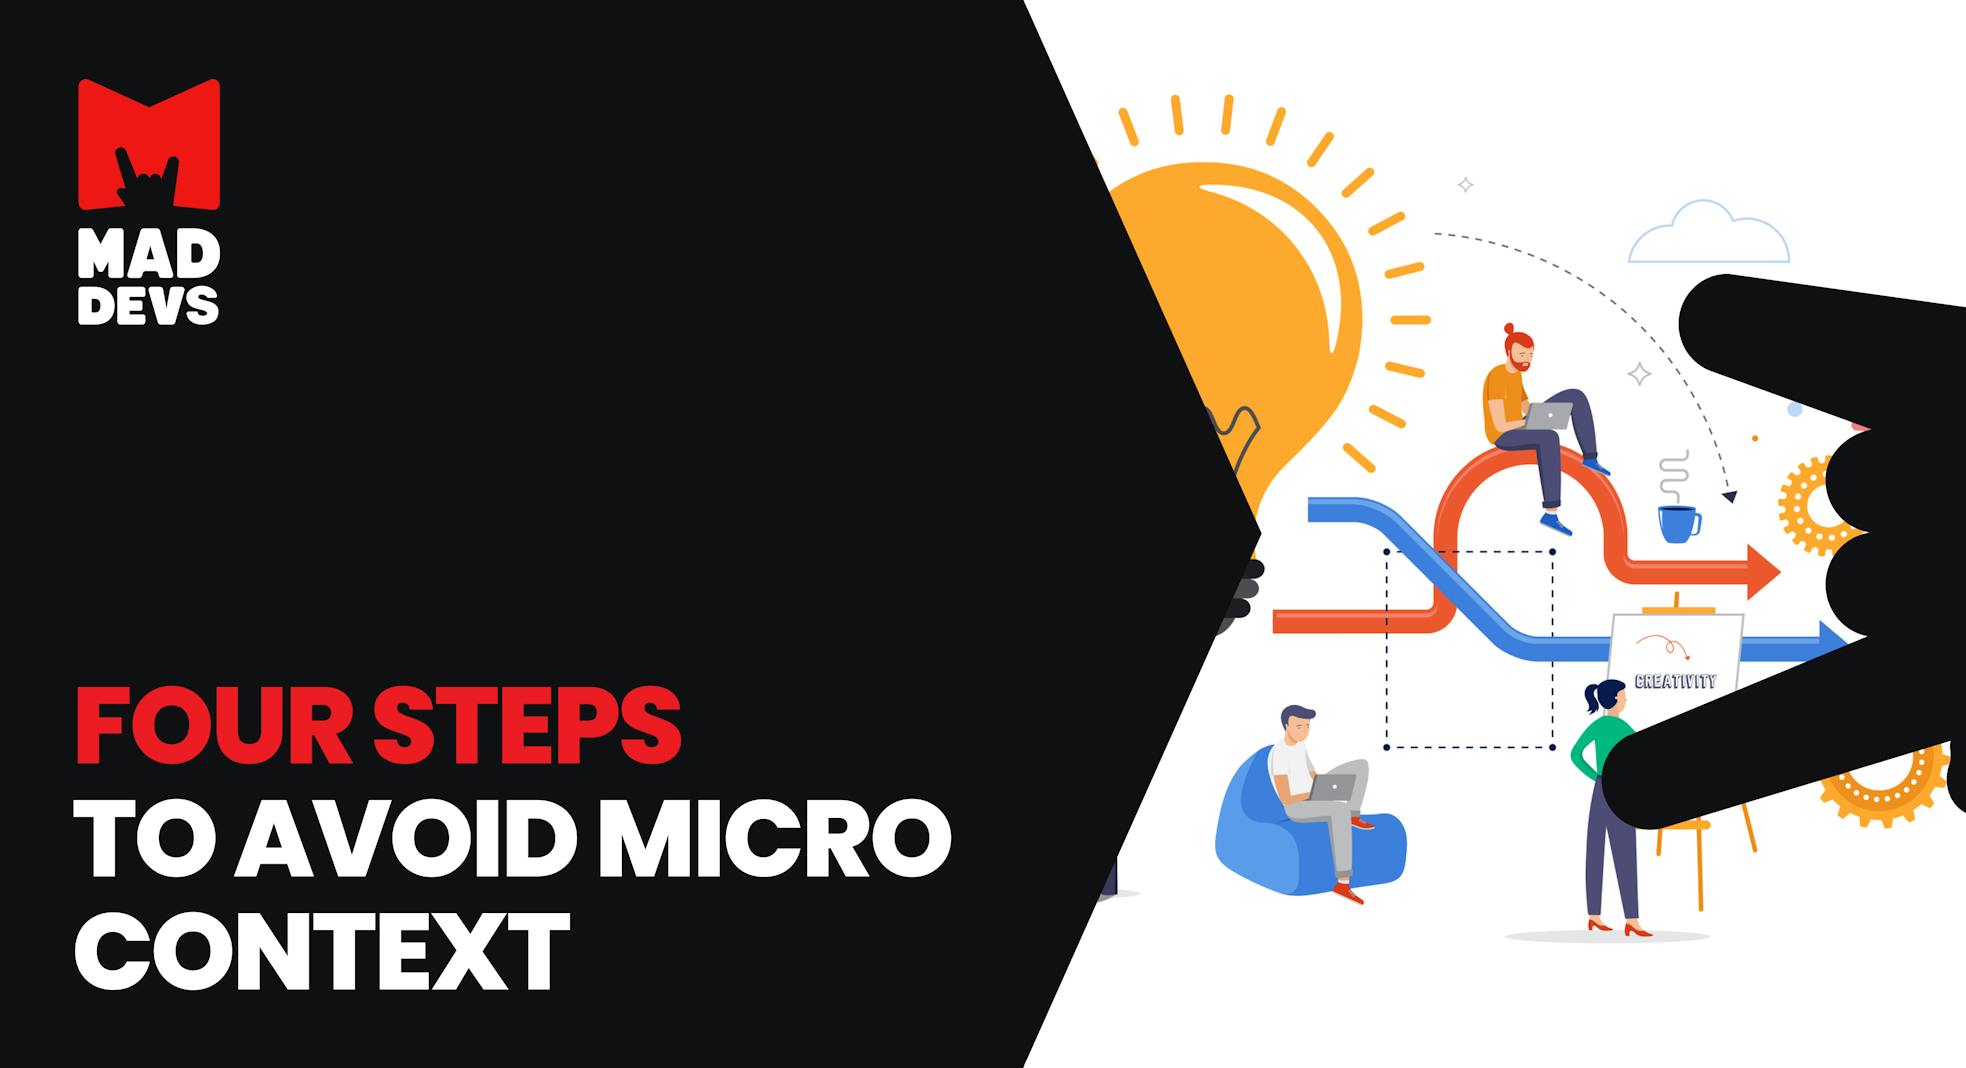 Improve Team Productivity: 4 Steps to Avoid Micro Context